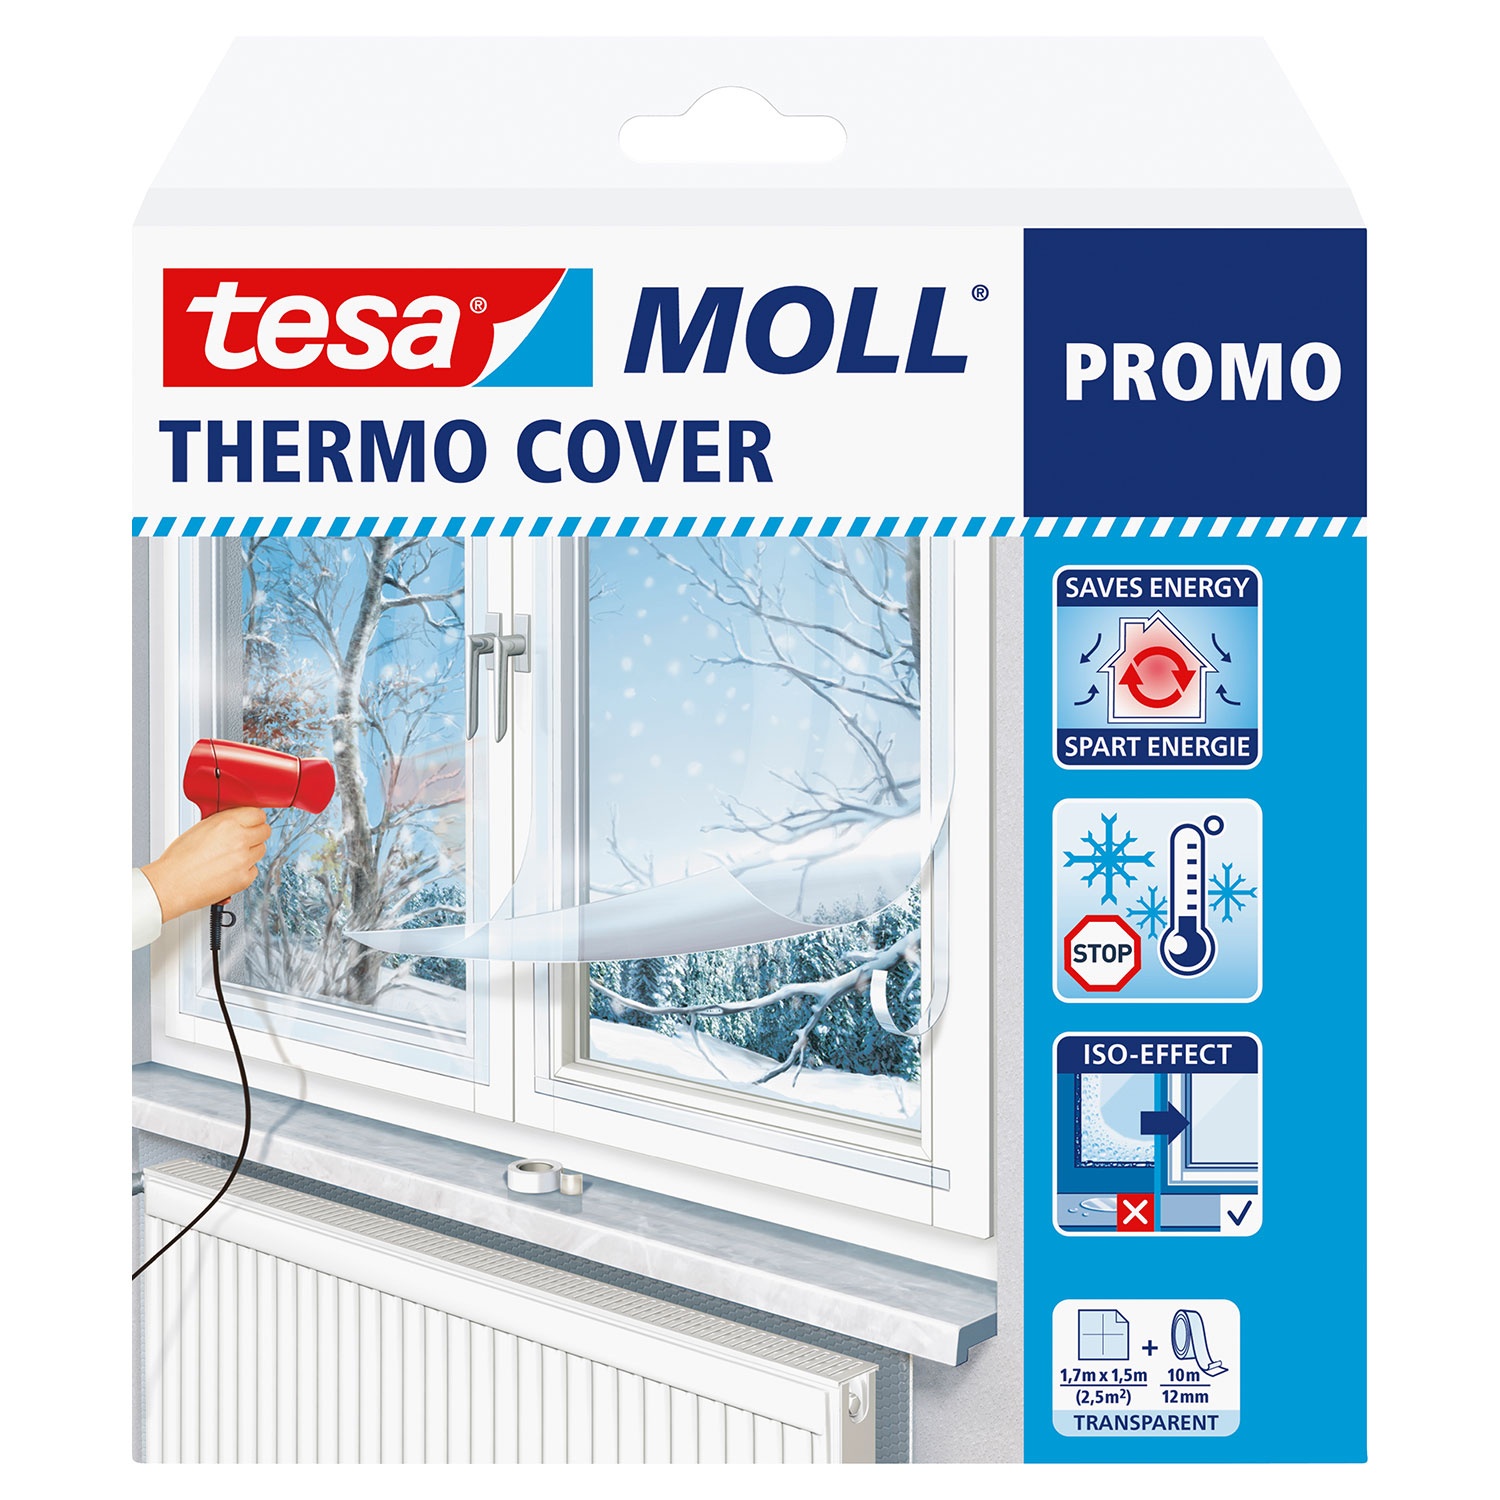 Innen Fenster Isolierung Film,Thermo Cover Fenster-Isolierfolie